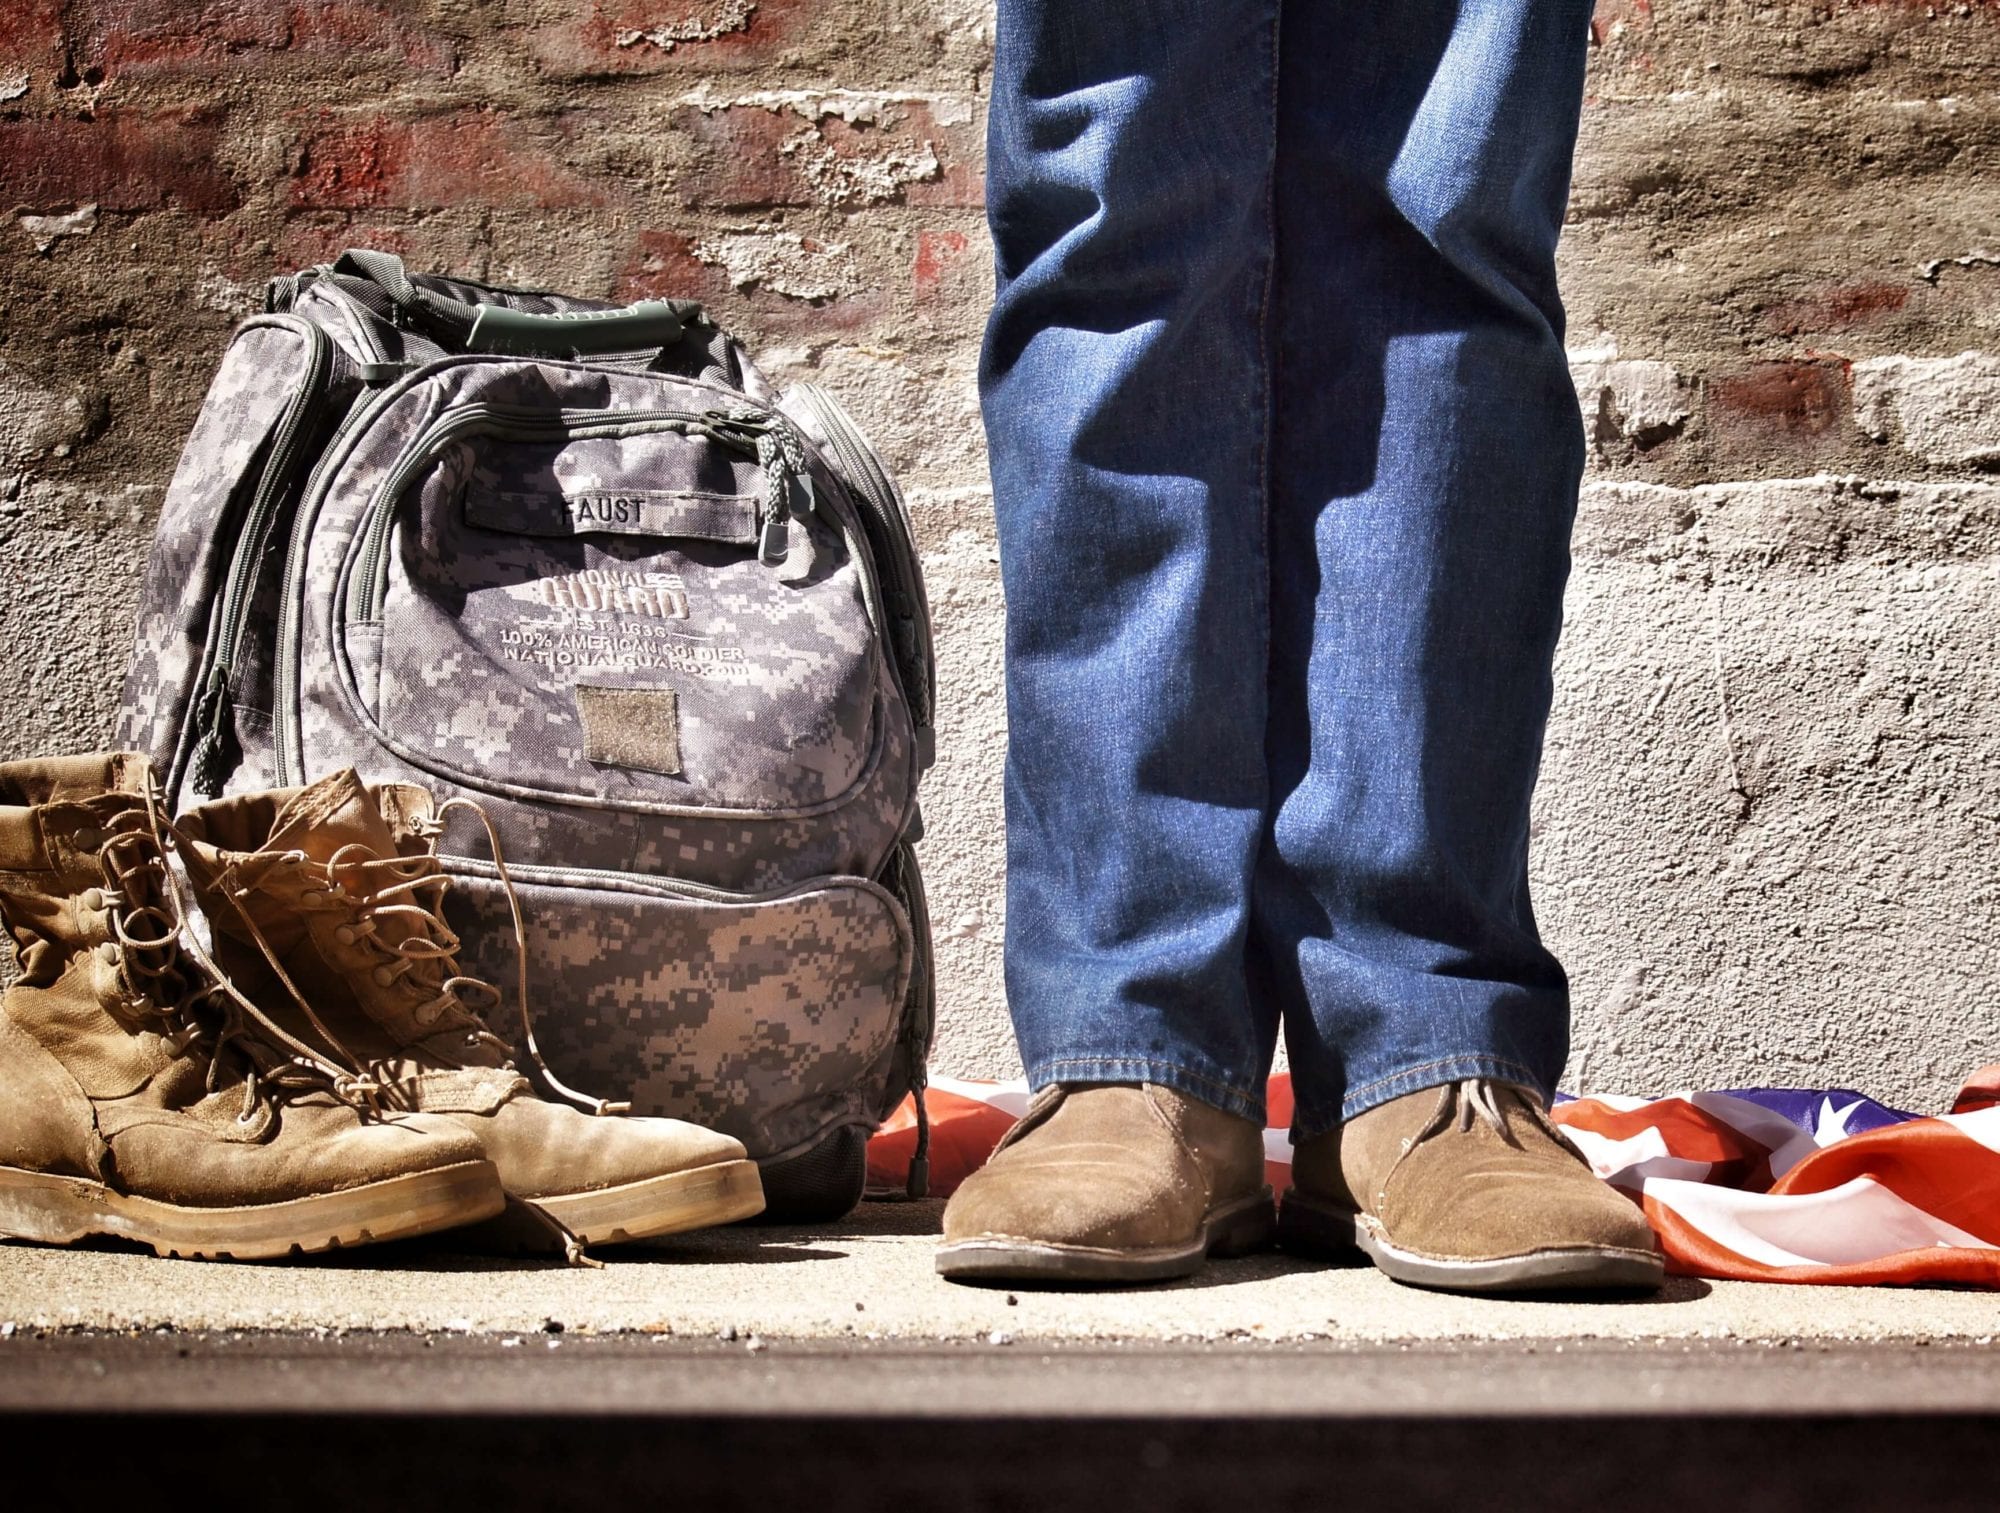 Veteran's Boots and Backpack Next to Legs